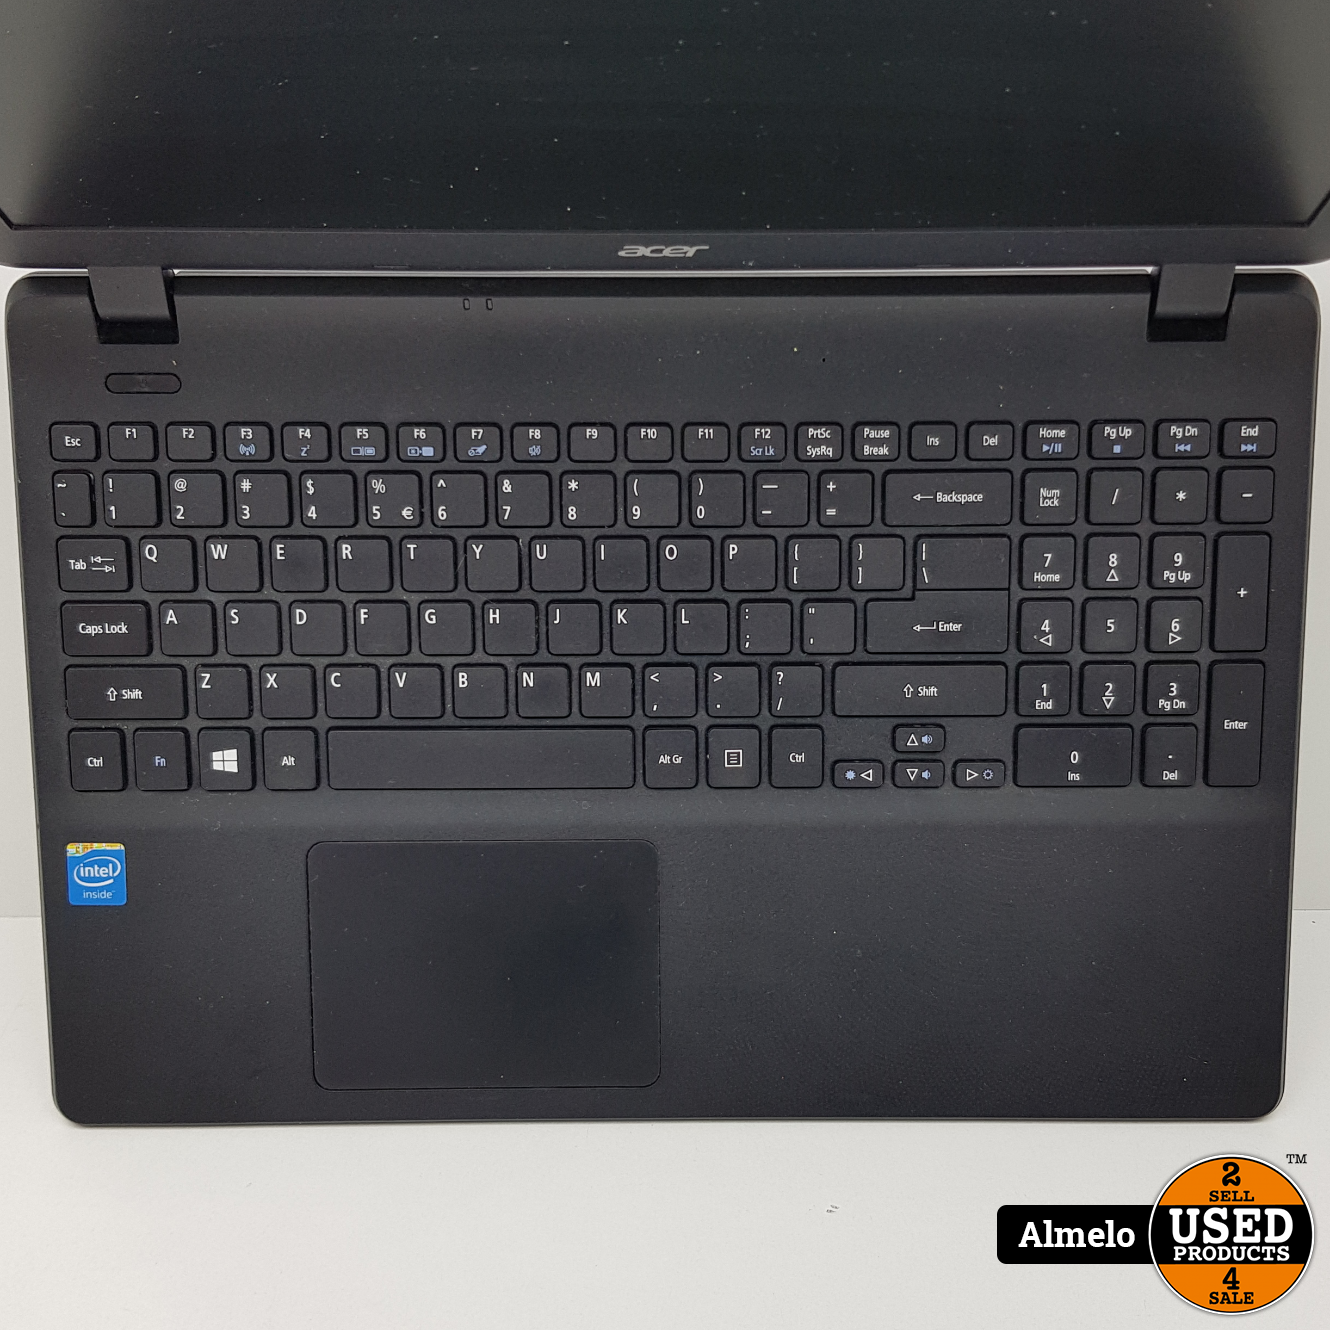 stok intellectueel slijtage acer Acer ES1-512 Laptop - Used Products Almelo